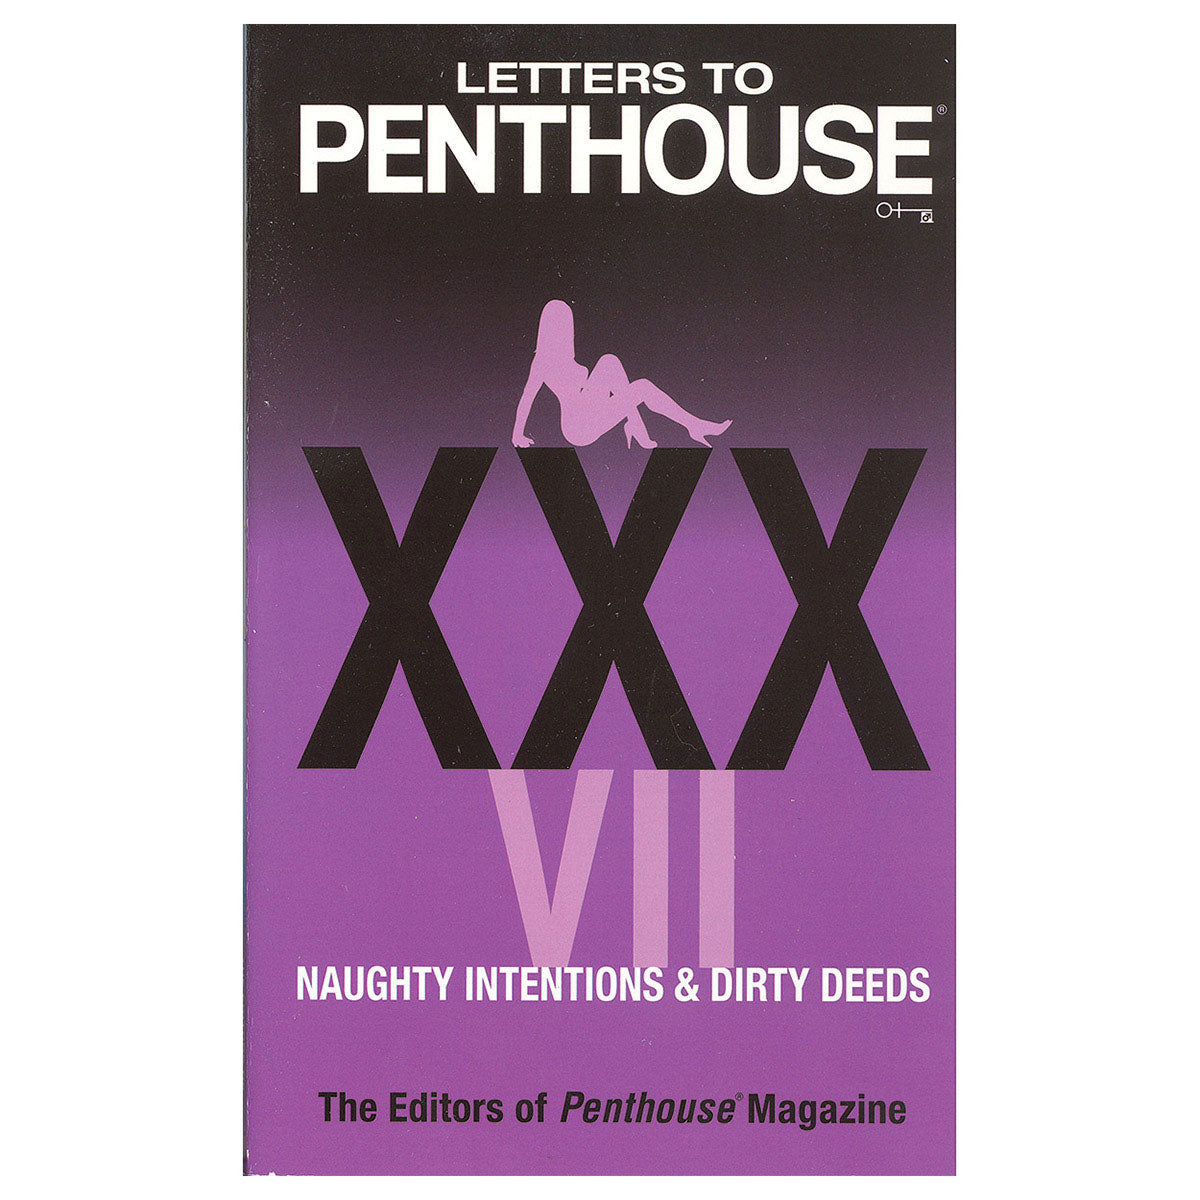 Letters to Penthouse XXXVII - Naughty Intentions & Dirty Deeds - Grand Central Publishing